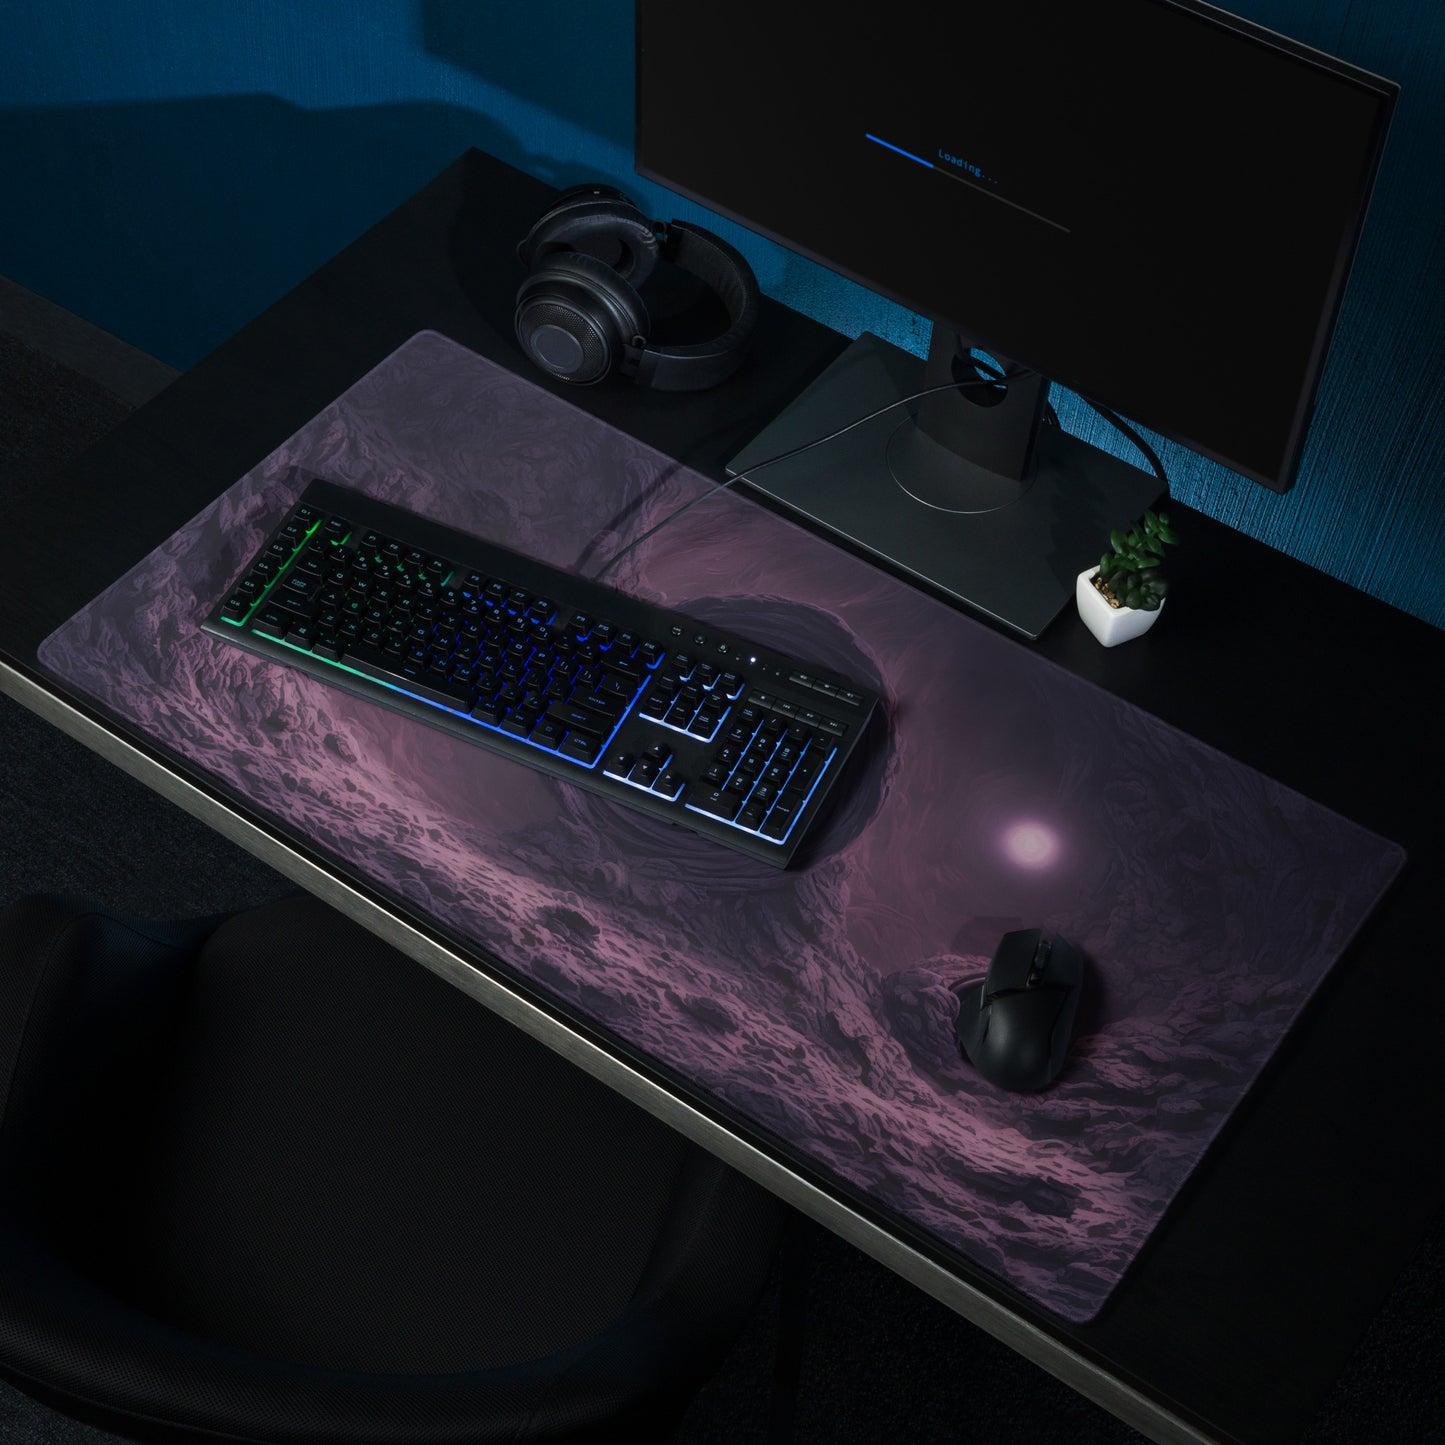 Hollow Earth : Gaming mouse pad